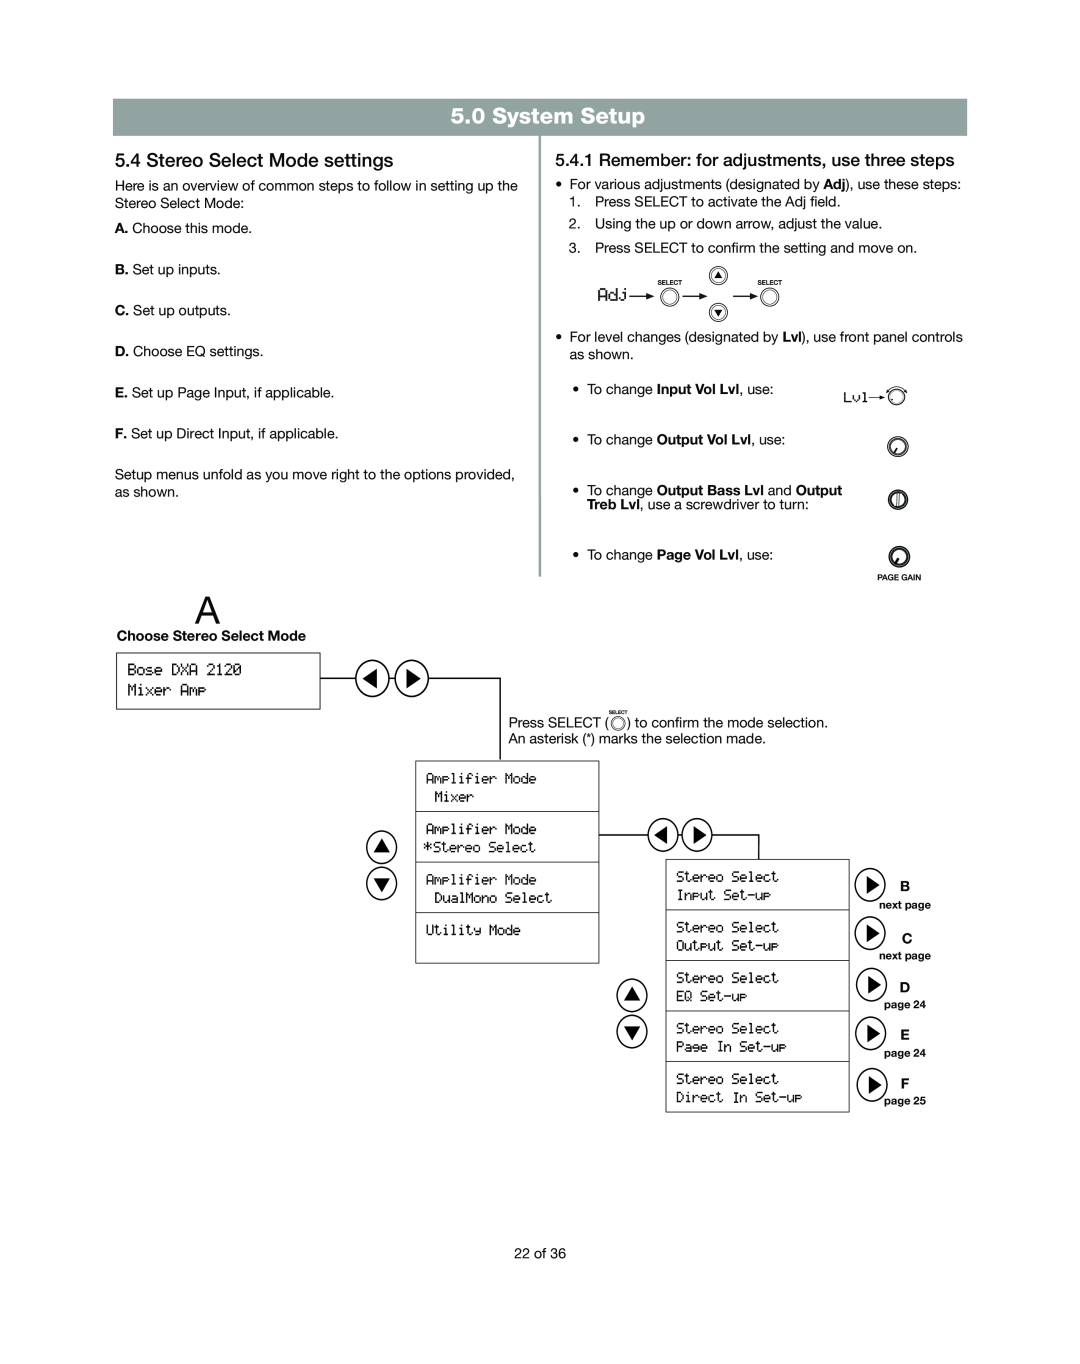 Bose DXA2120 manual Stereo Select Mode settings, System Setup, Remember for adjustments, use three steps 